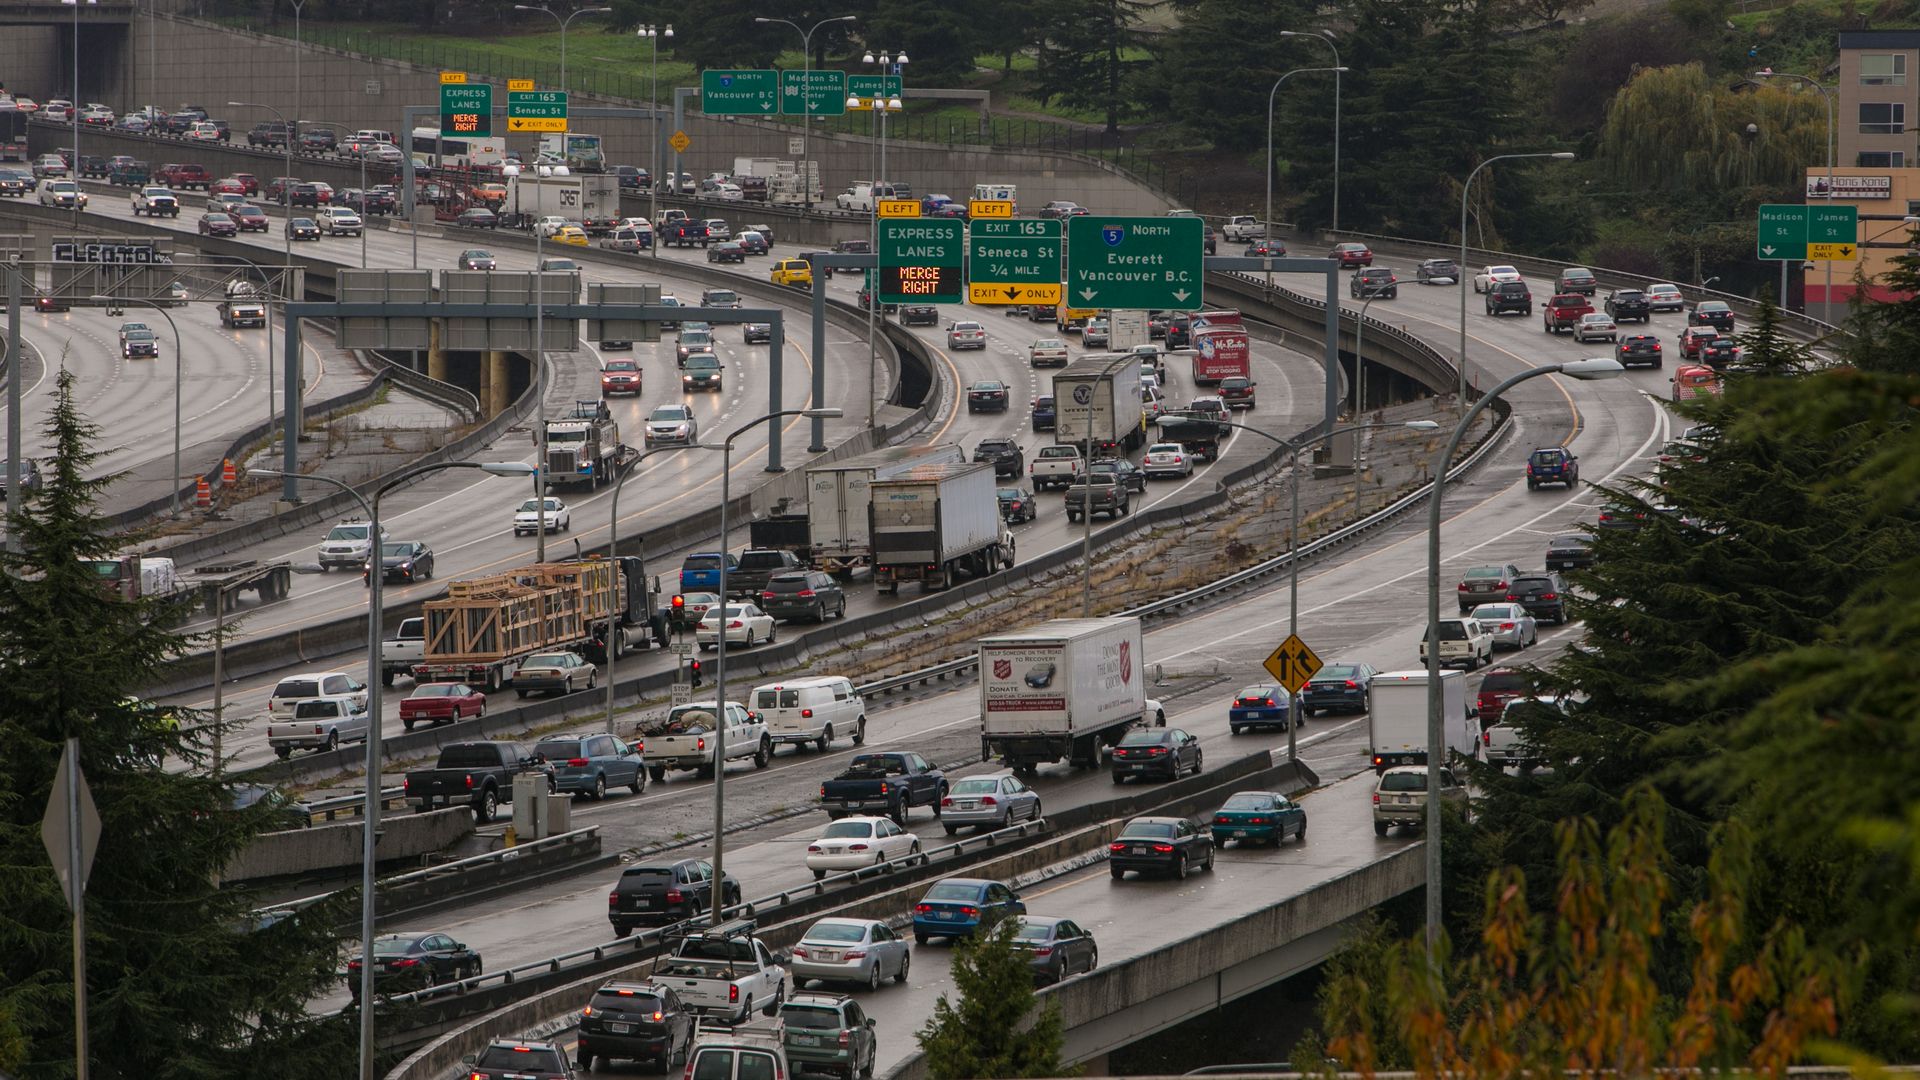 Image of a Seattle traffic jam